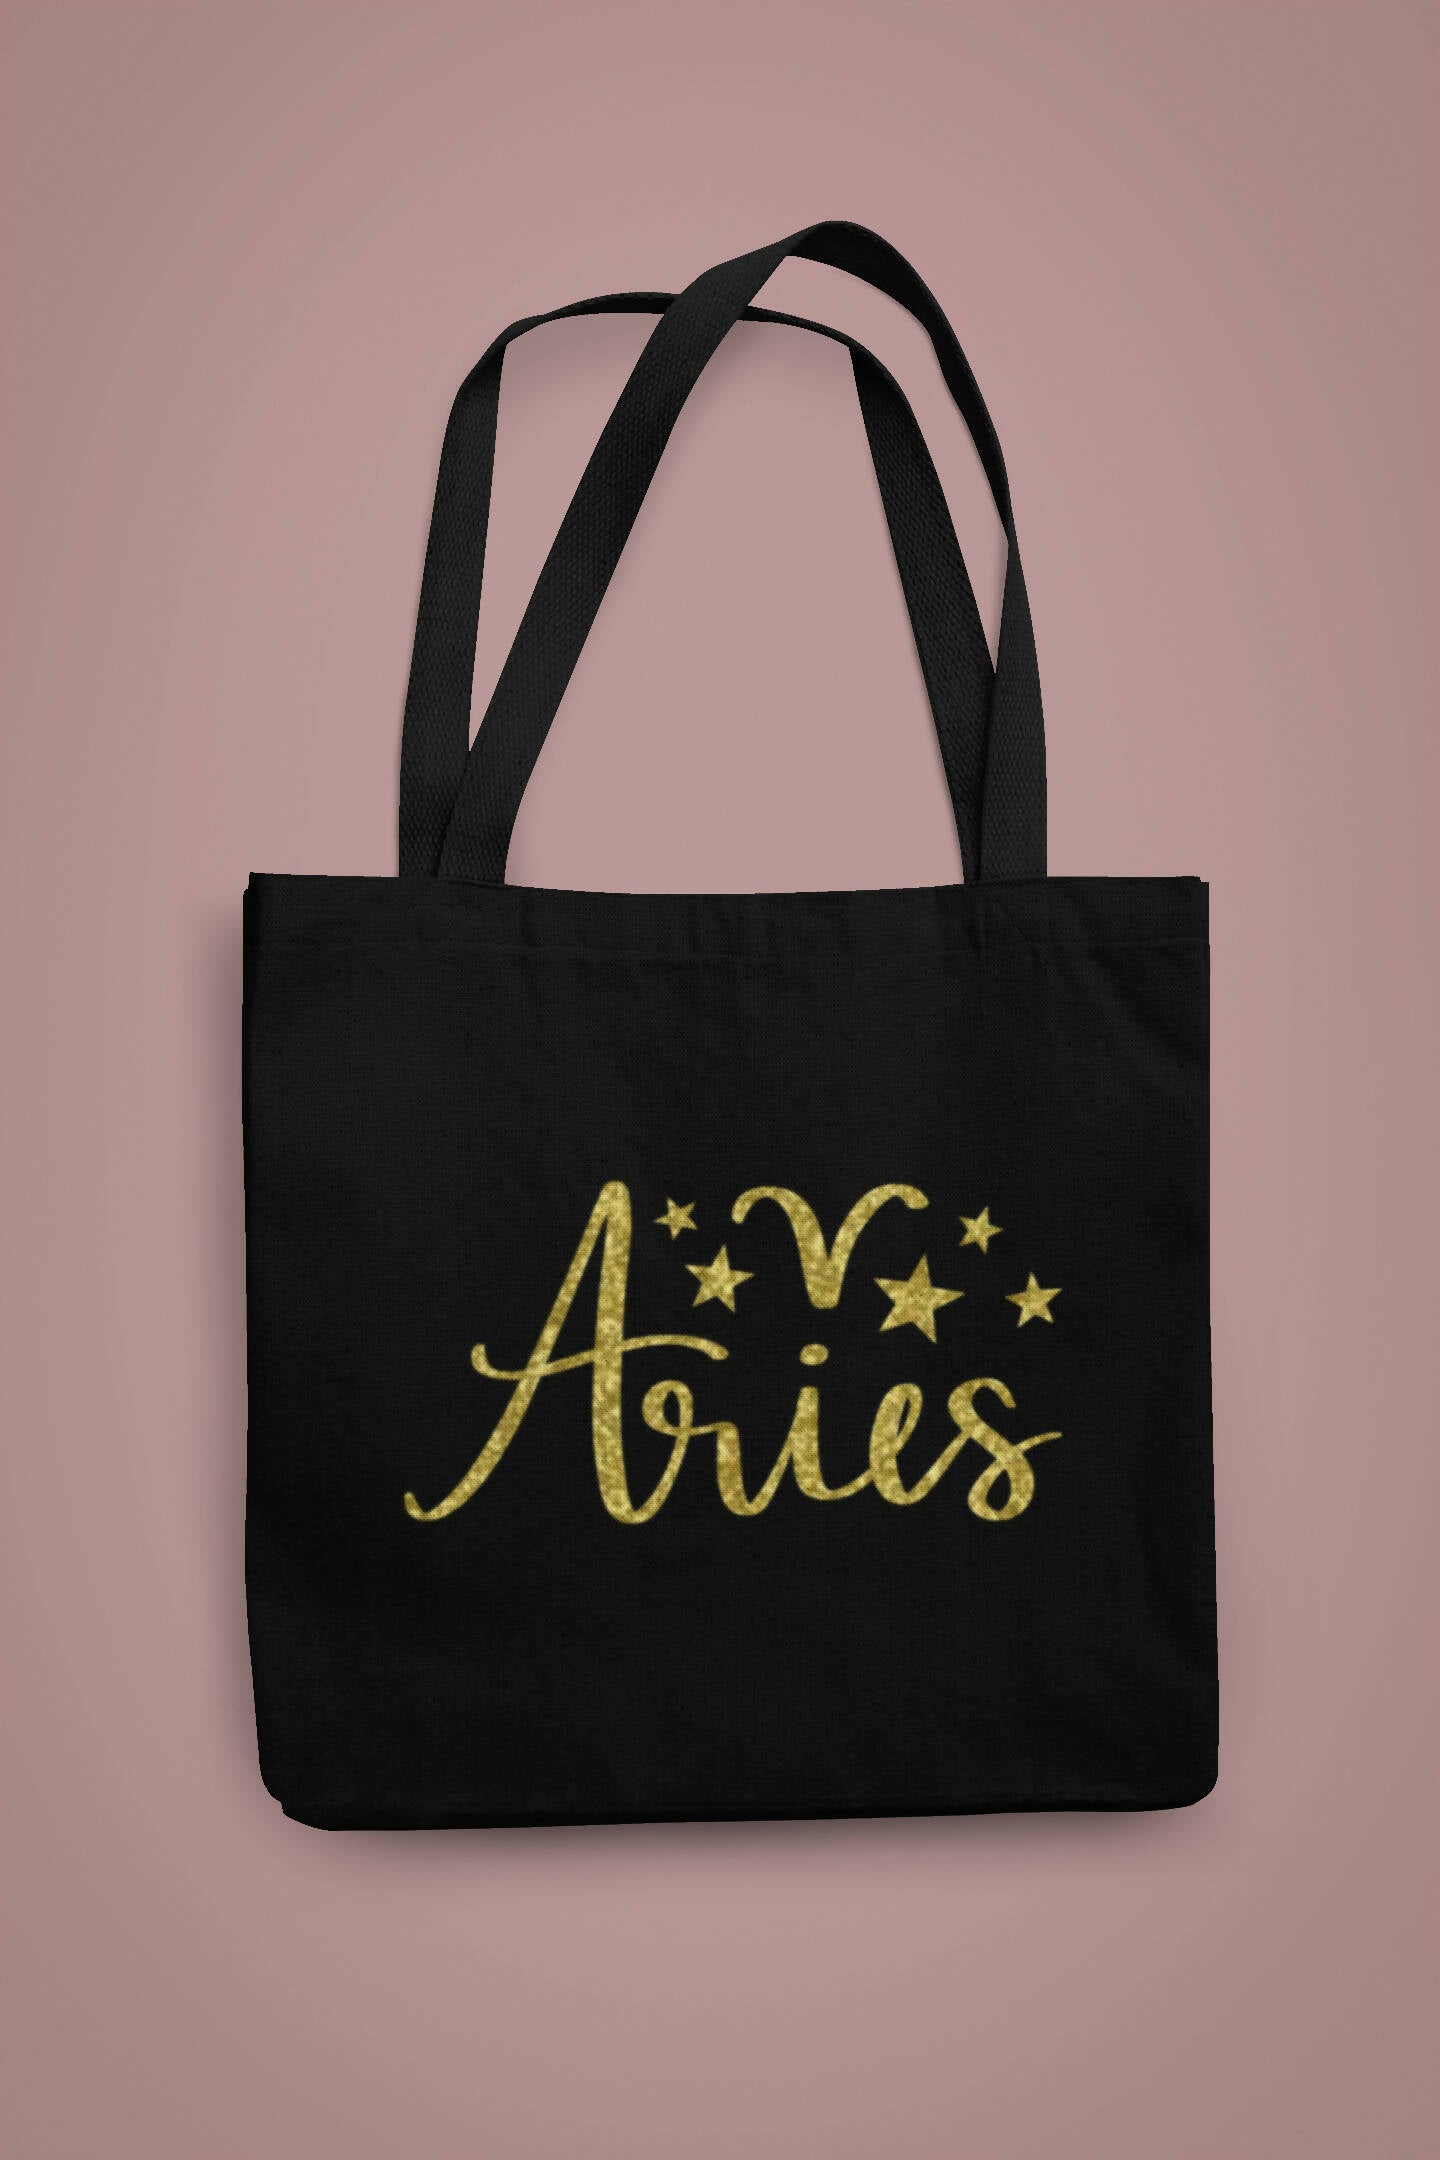 Aries Tote Bag with Gold Glitter Design